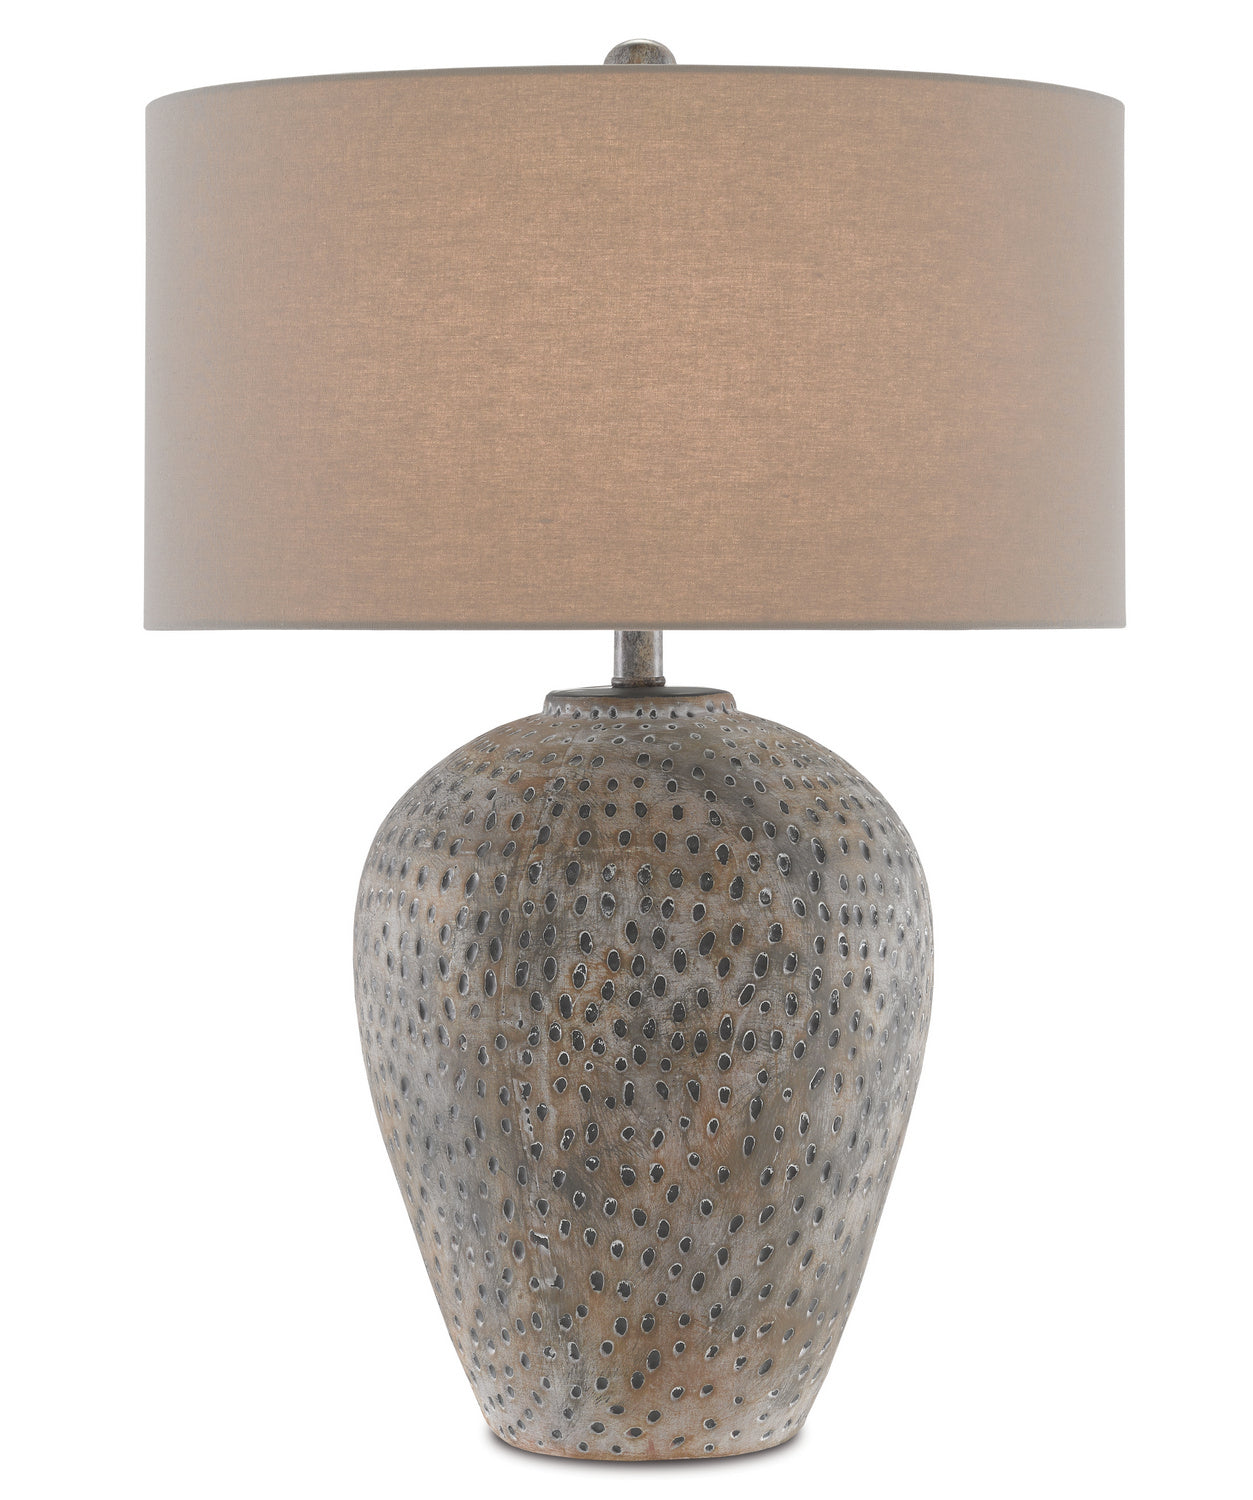 One Light Table Lamp from the Junius collection in Earth Gray finish